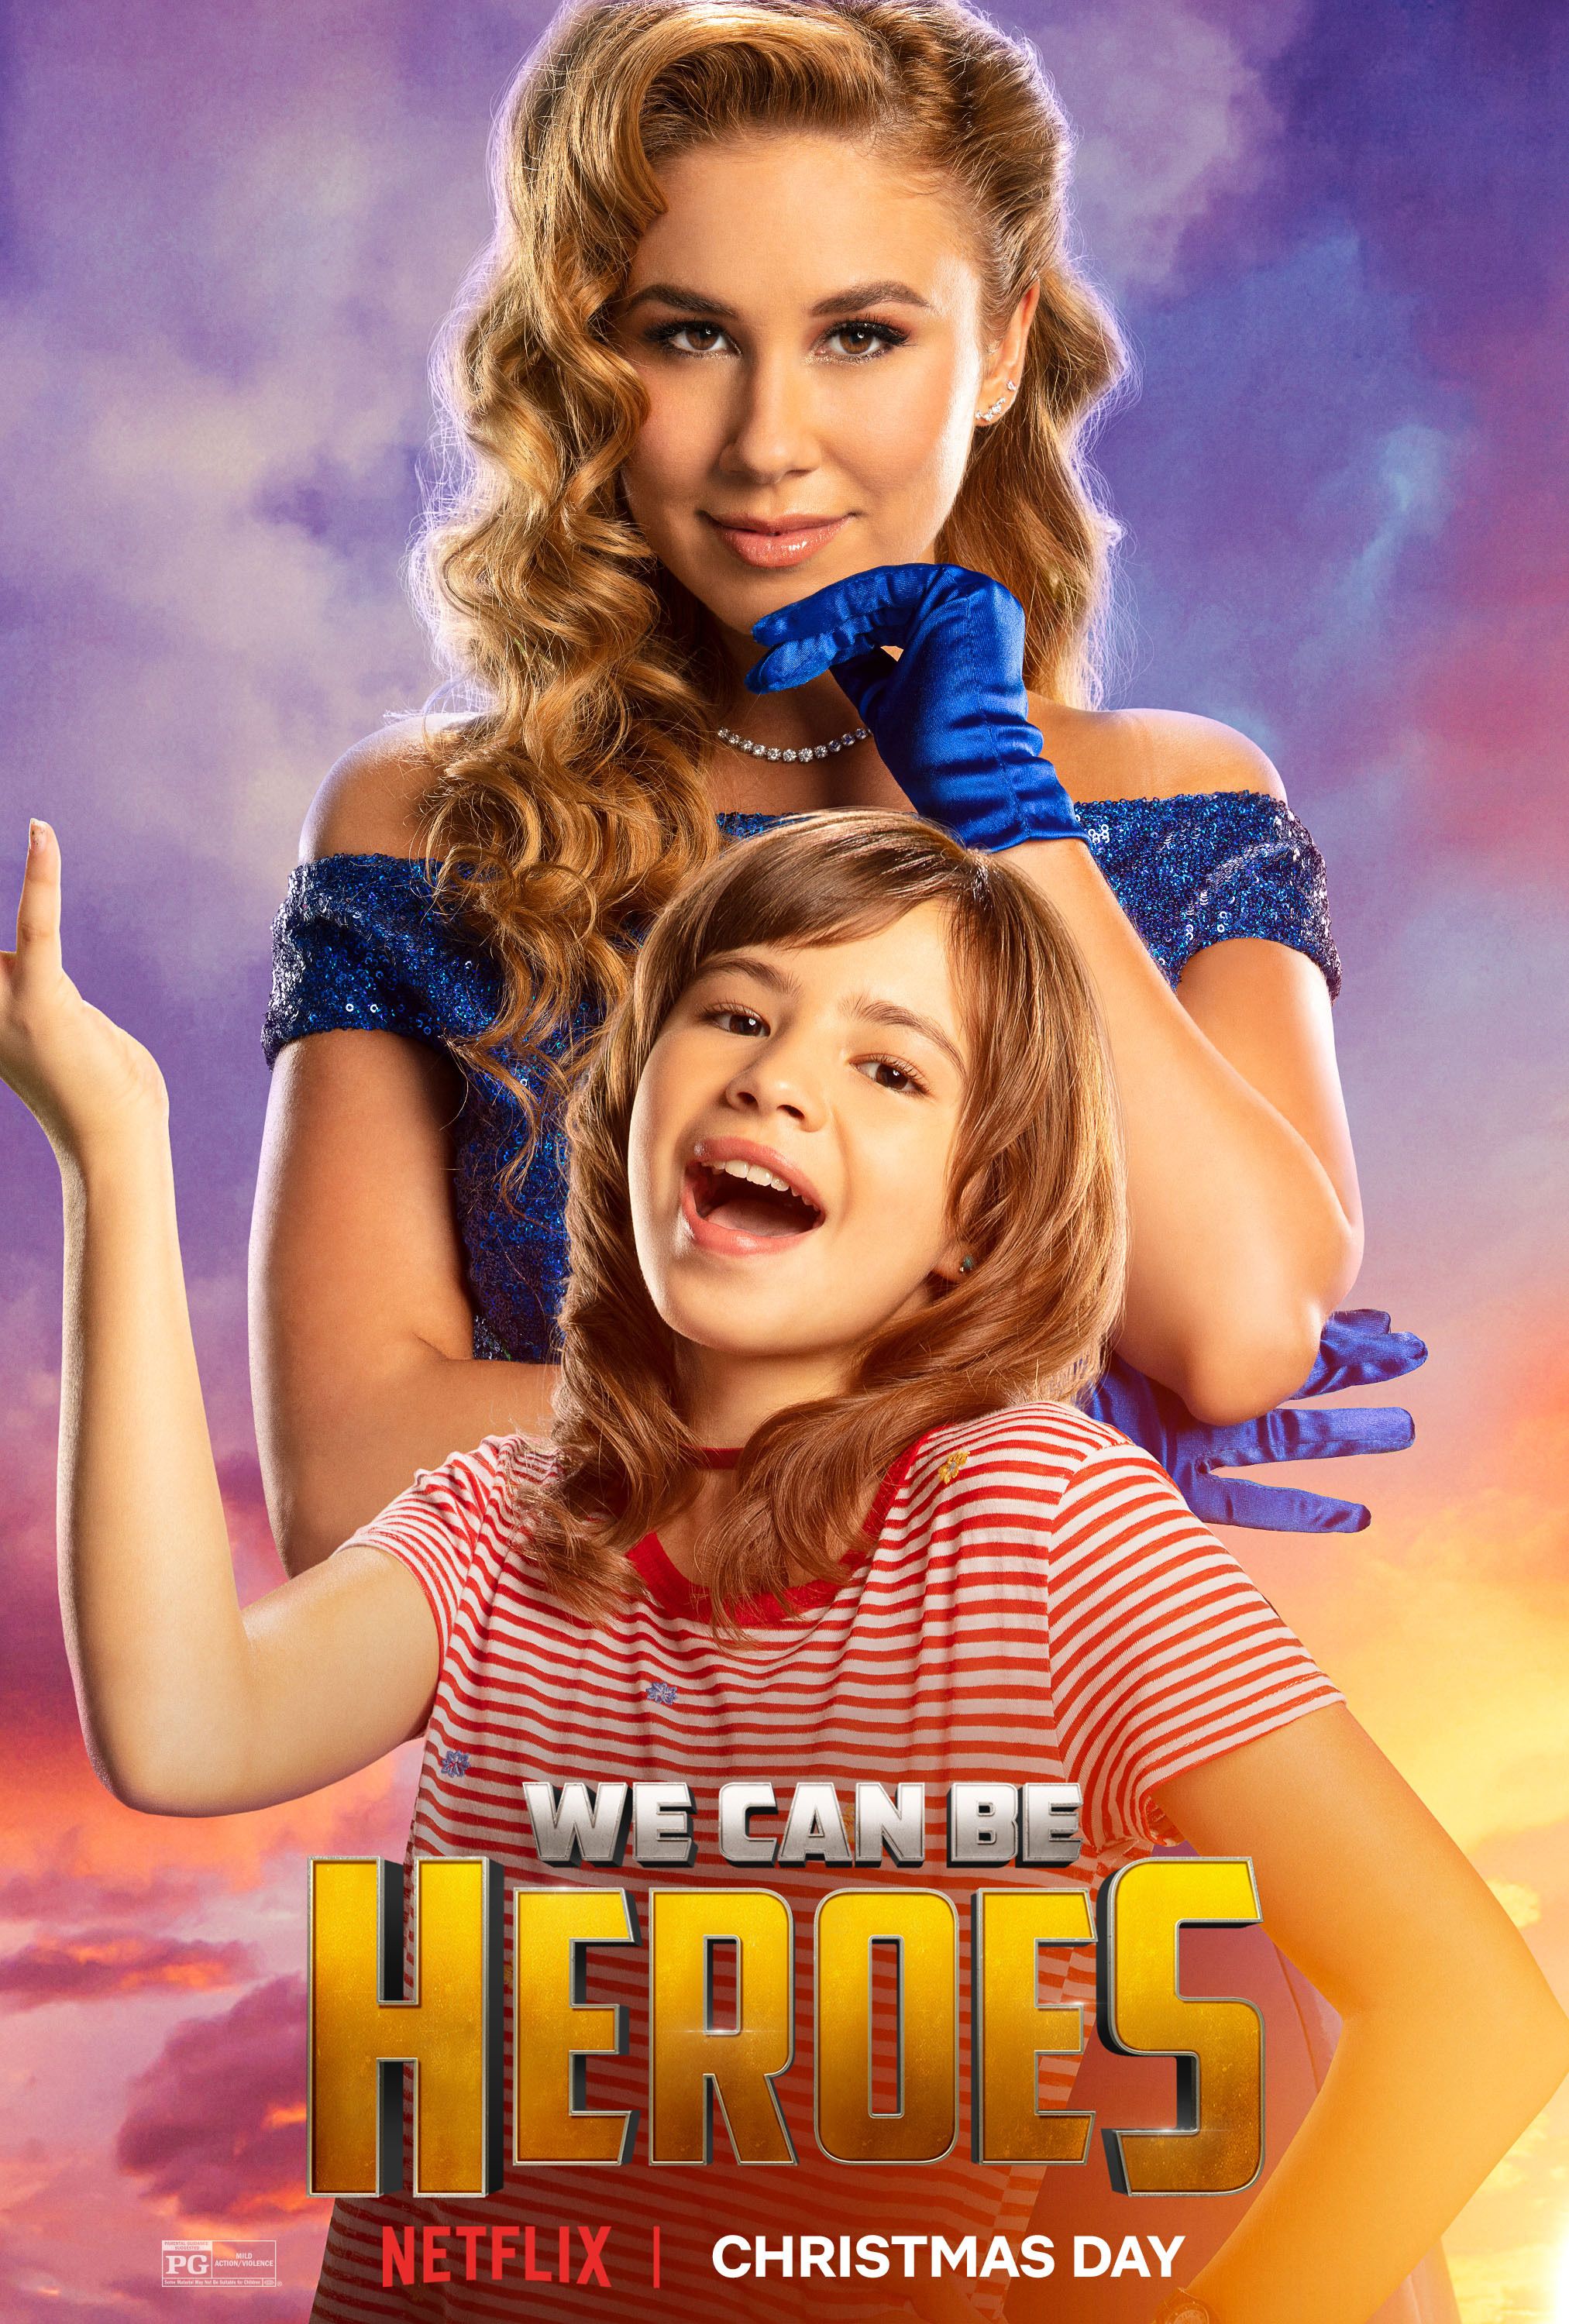 We Can Be Heroes Poster 4